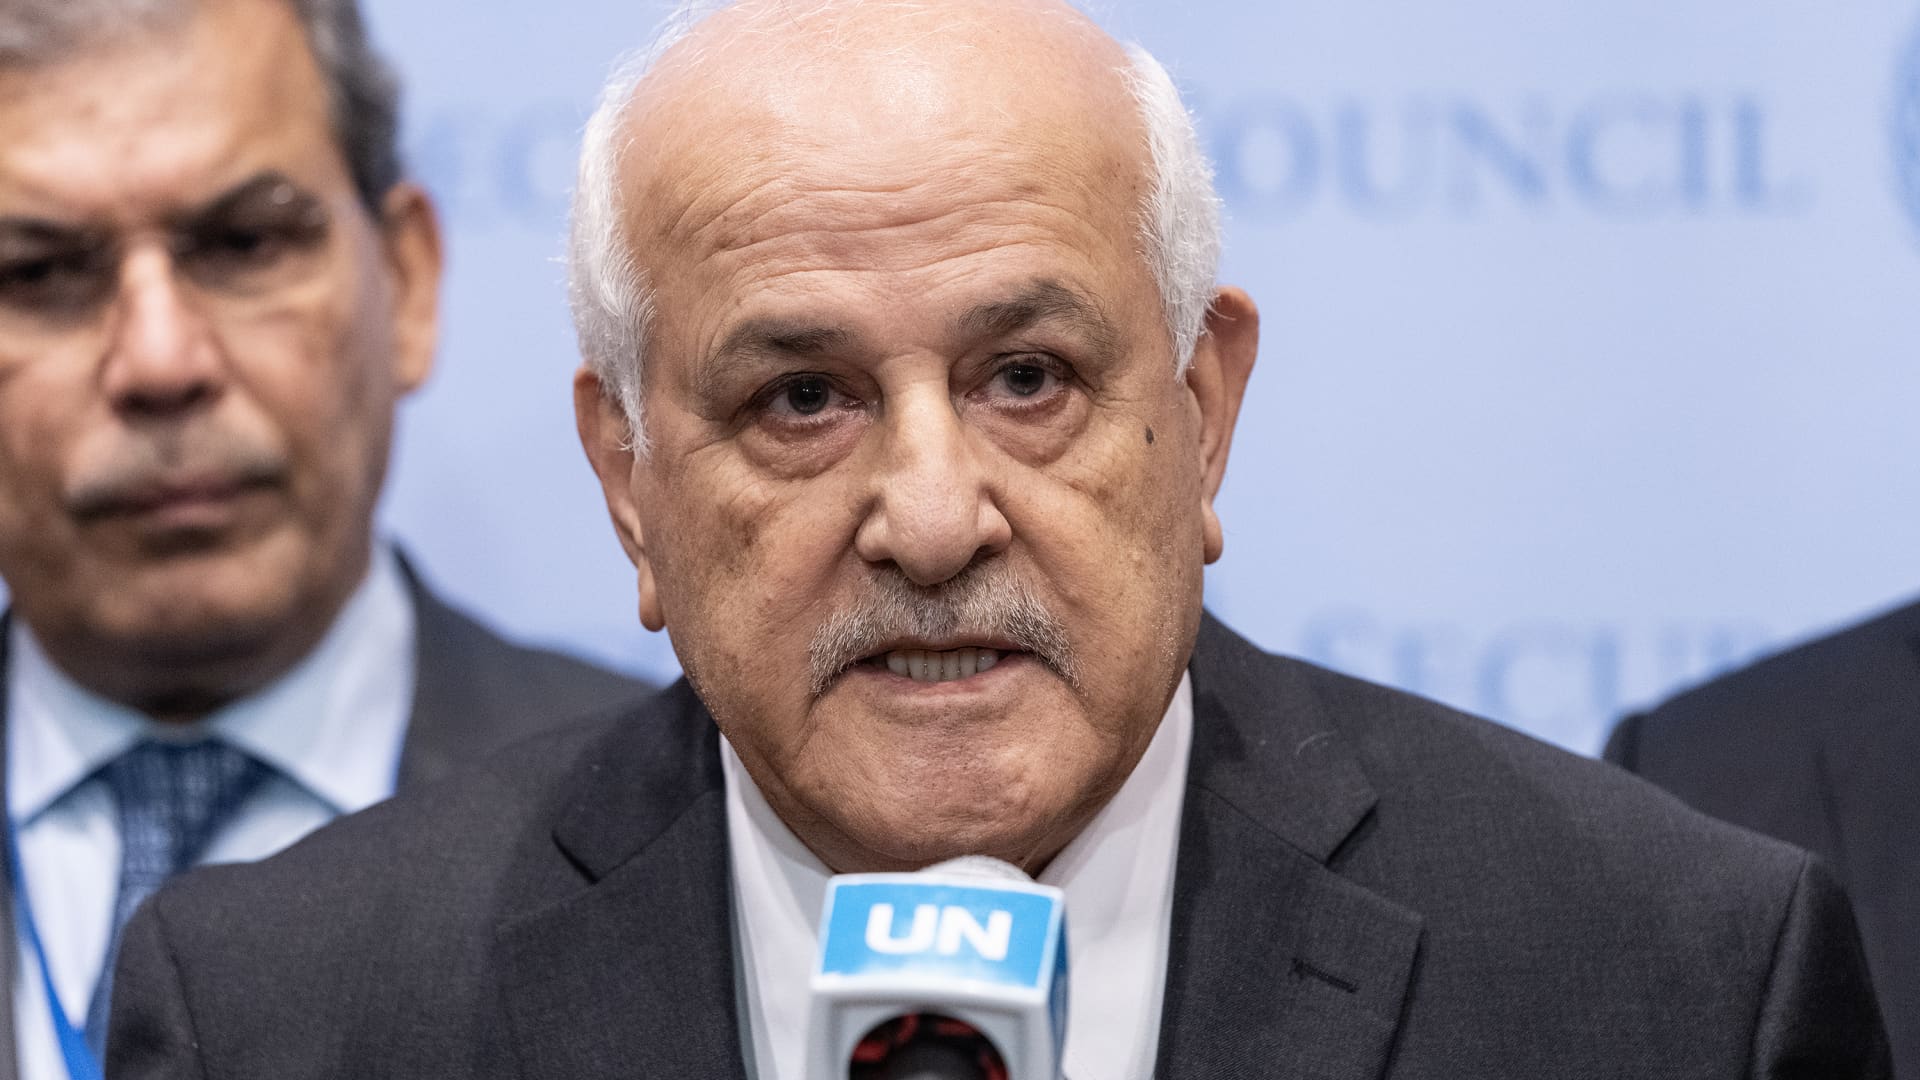 State of Palestine Ambassador Riyad Mansour speaks to the press before the start of the closed doors Security Council meeting on the situation in the Middle East at UN Headquarters. (Photo by Lev Radin/Pacific Press/LightRocket via Getty Images)